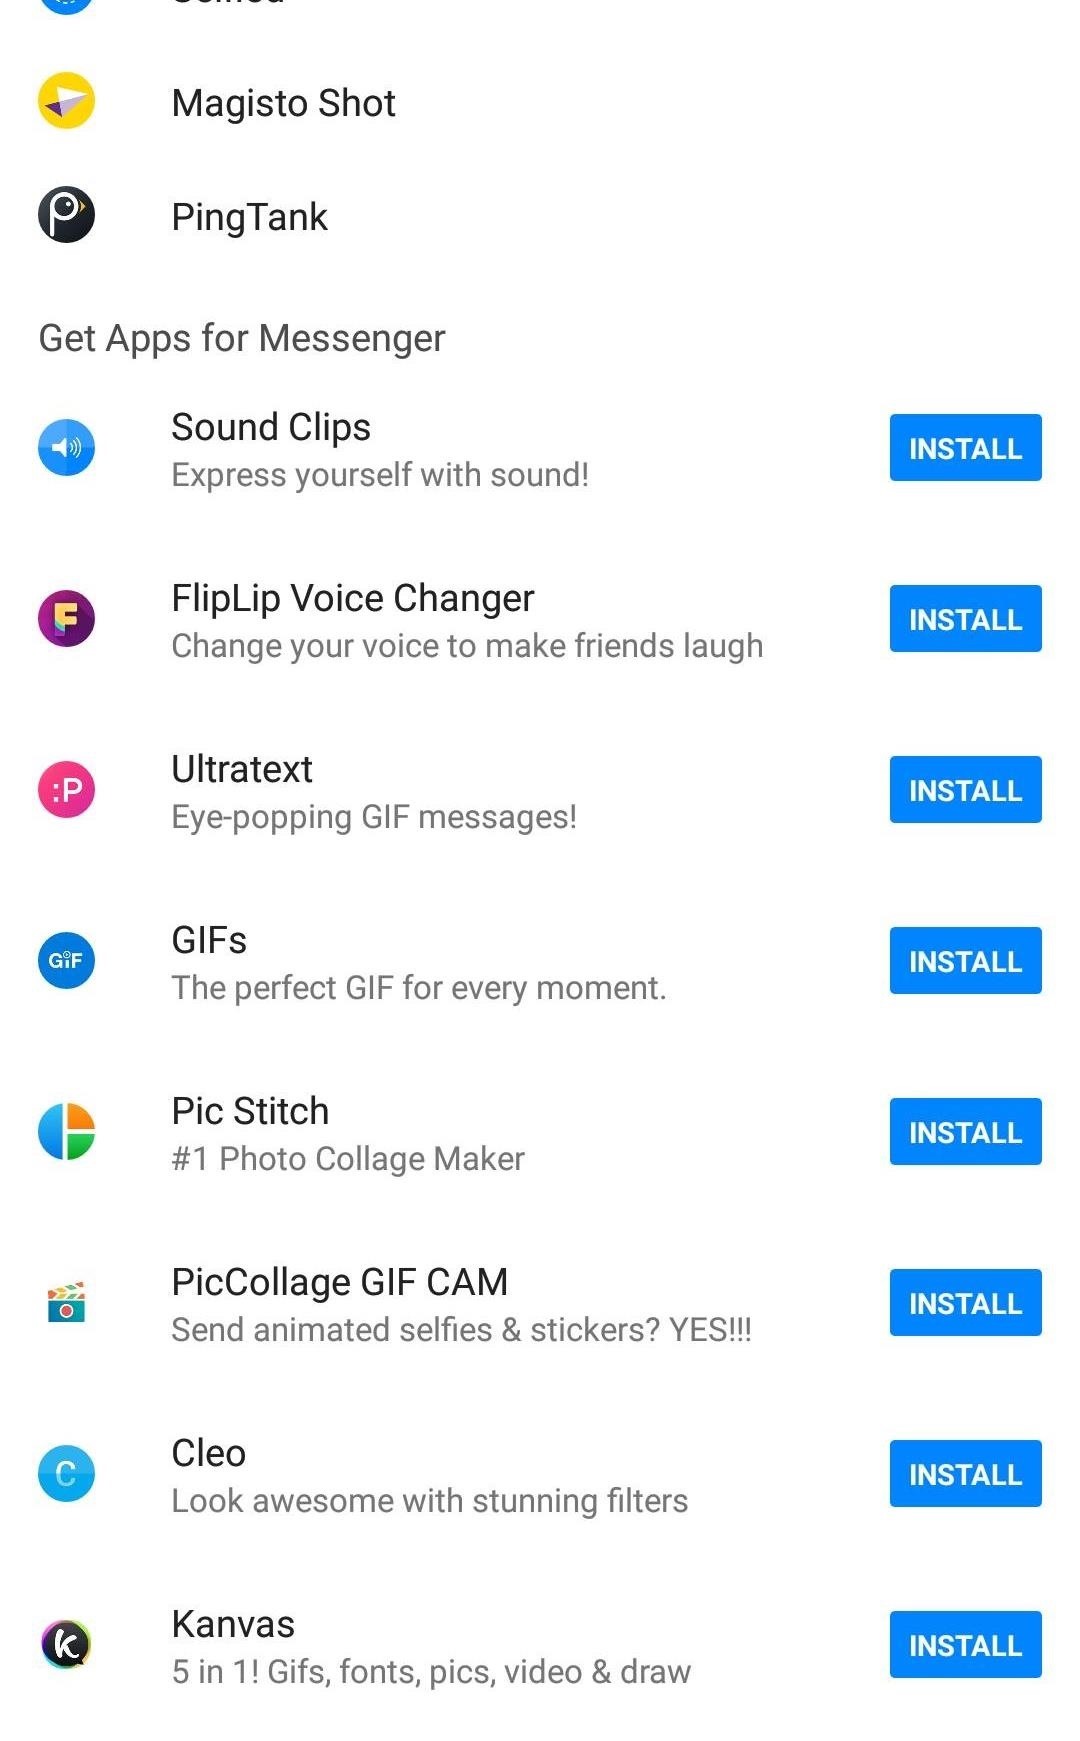 10 Third-Party Apps for Facebook Messenger You Should Install Right Now